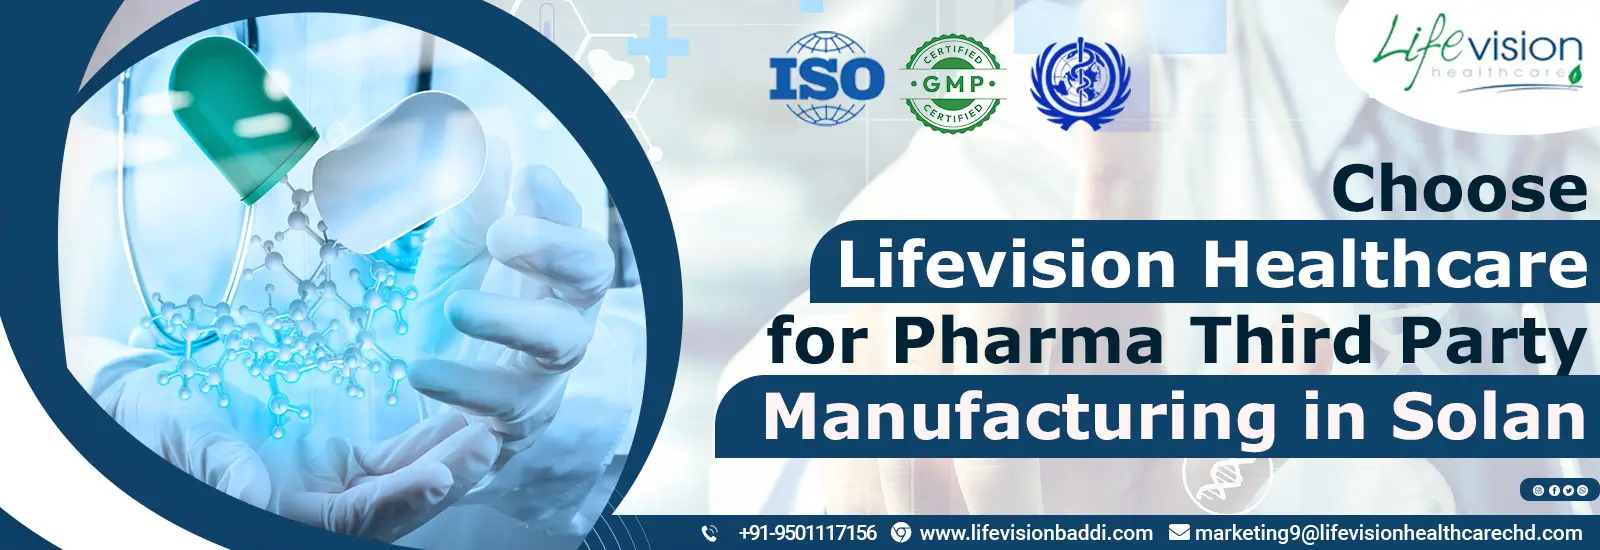 Top Third-Party Manufacturing Pharma Company in Solan | Lifevision Healthcare